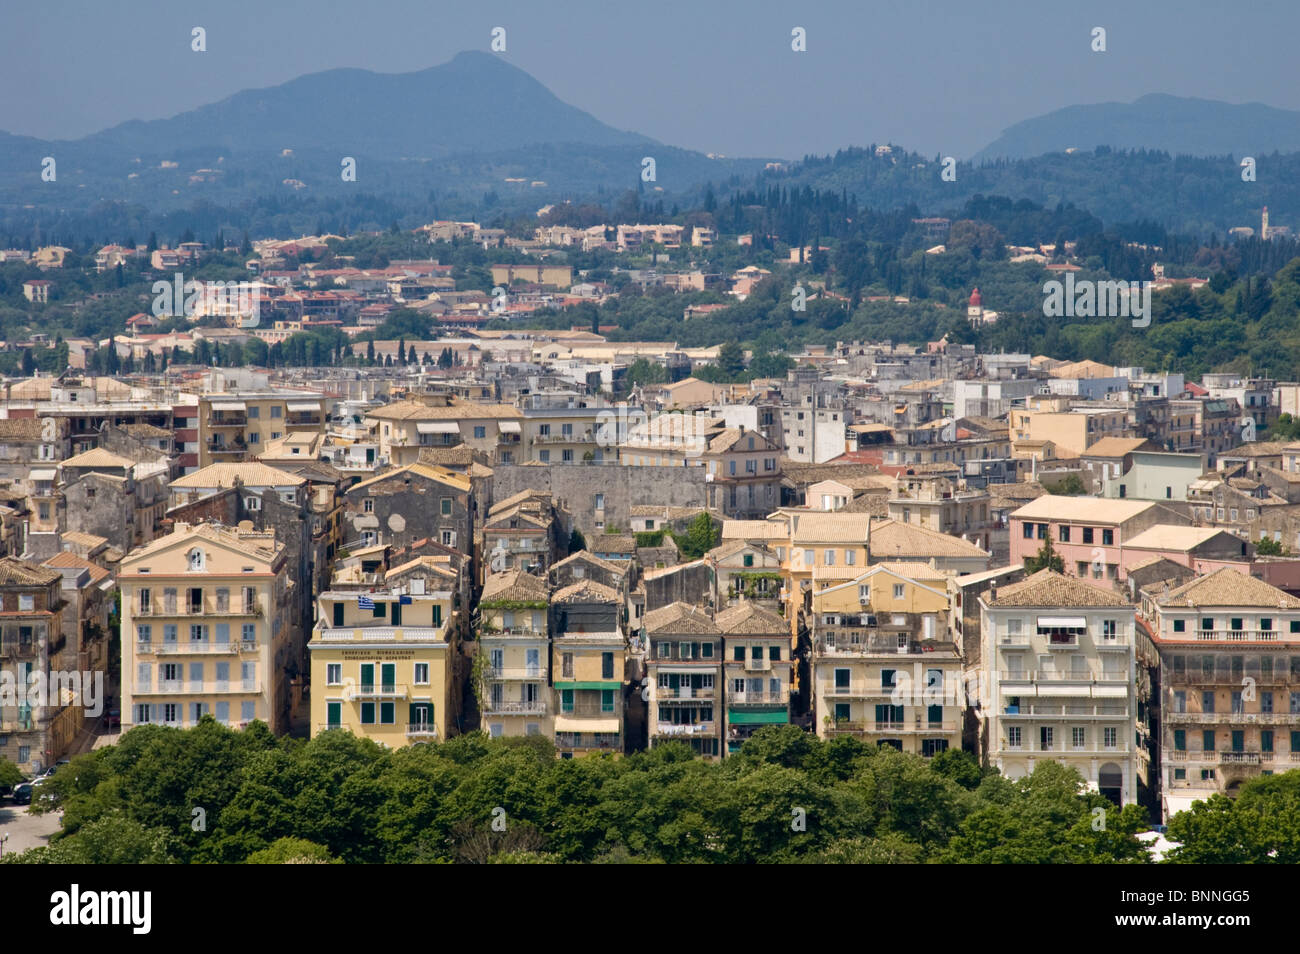 Corfu Old Town View over traditional style Venetian buildings in old Corfu Town on the Greek island of Corfu Greece GR Stock Photo